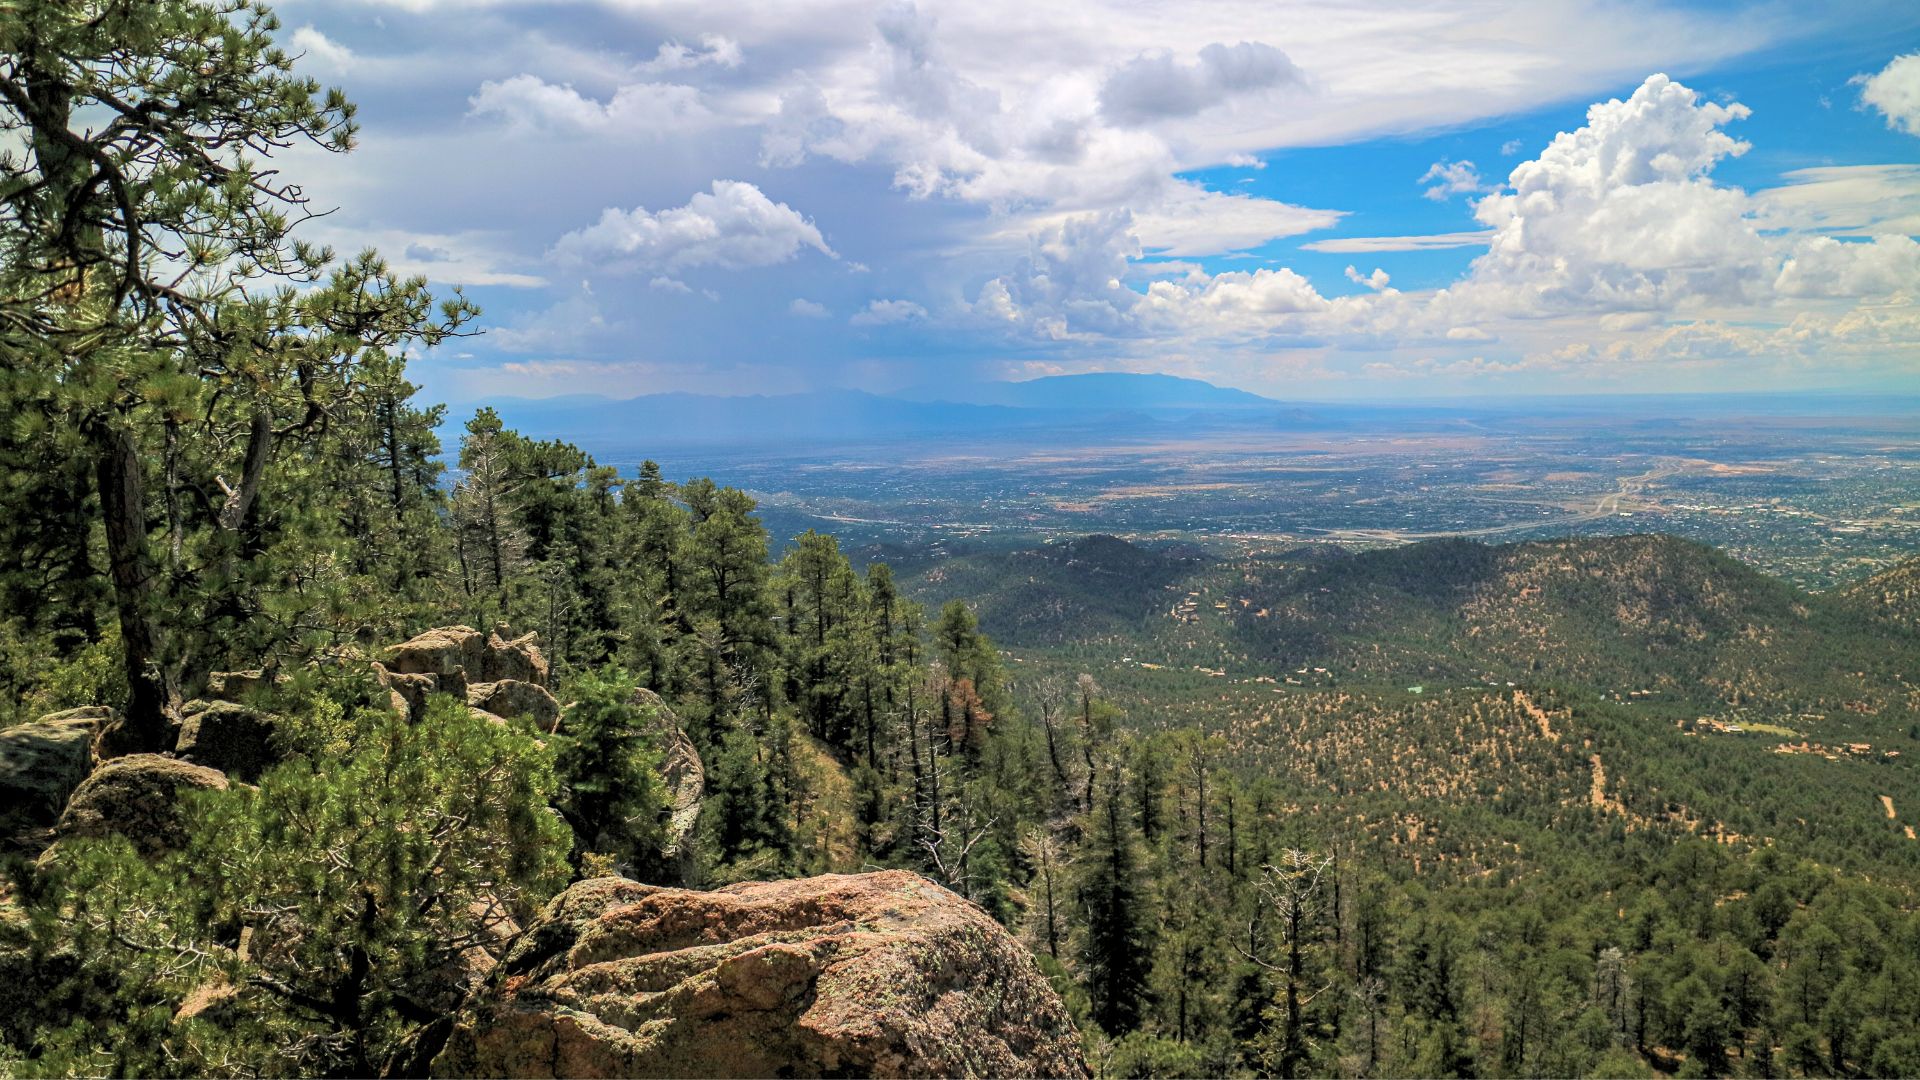 Ponderosa Pines with a distant view of the valley and further mountains from the top of Atalaya